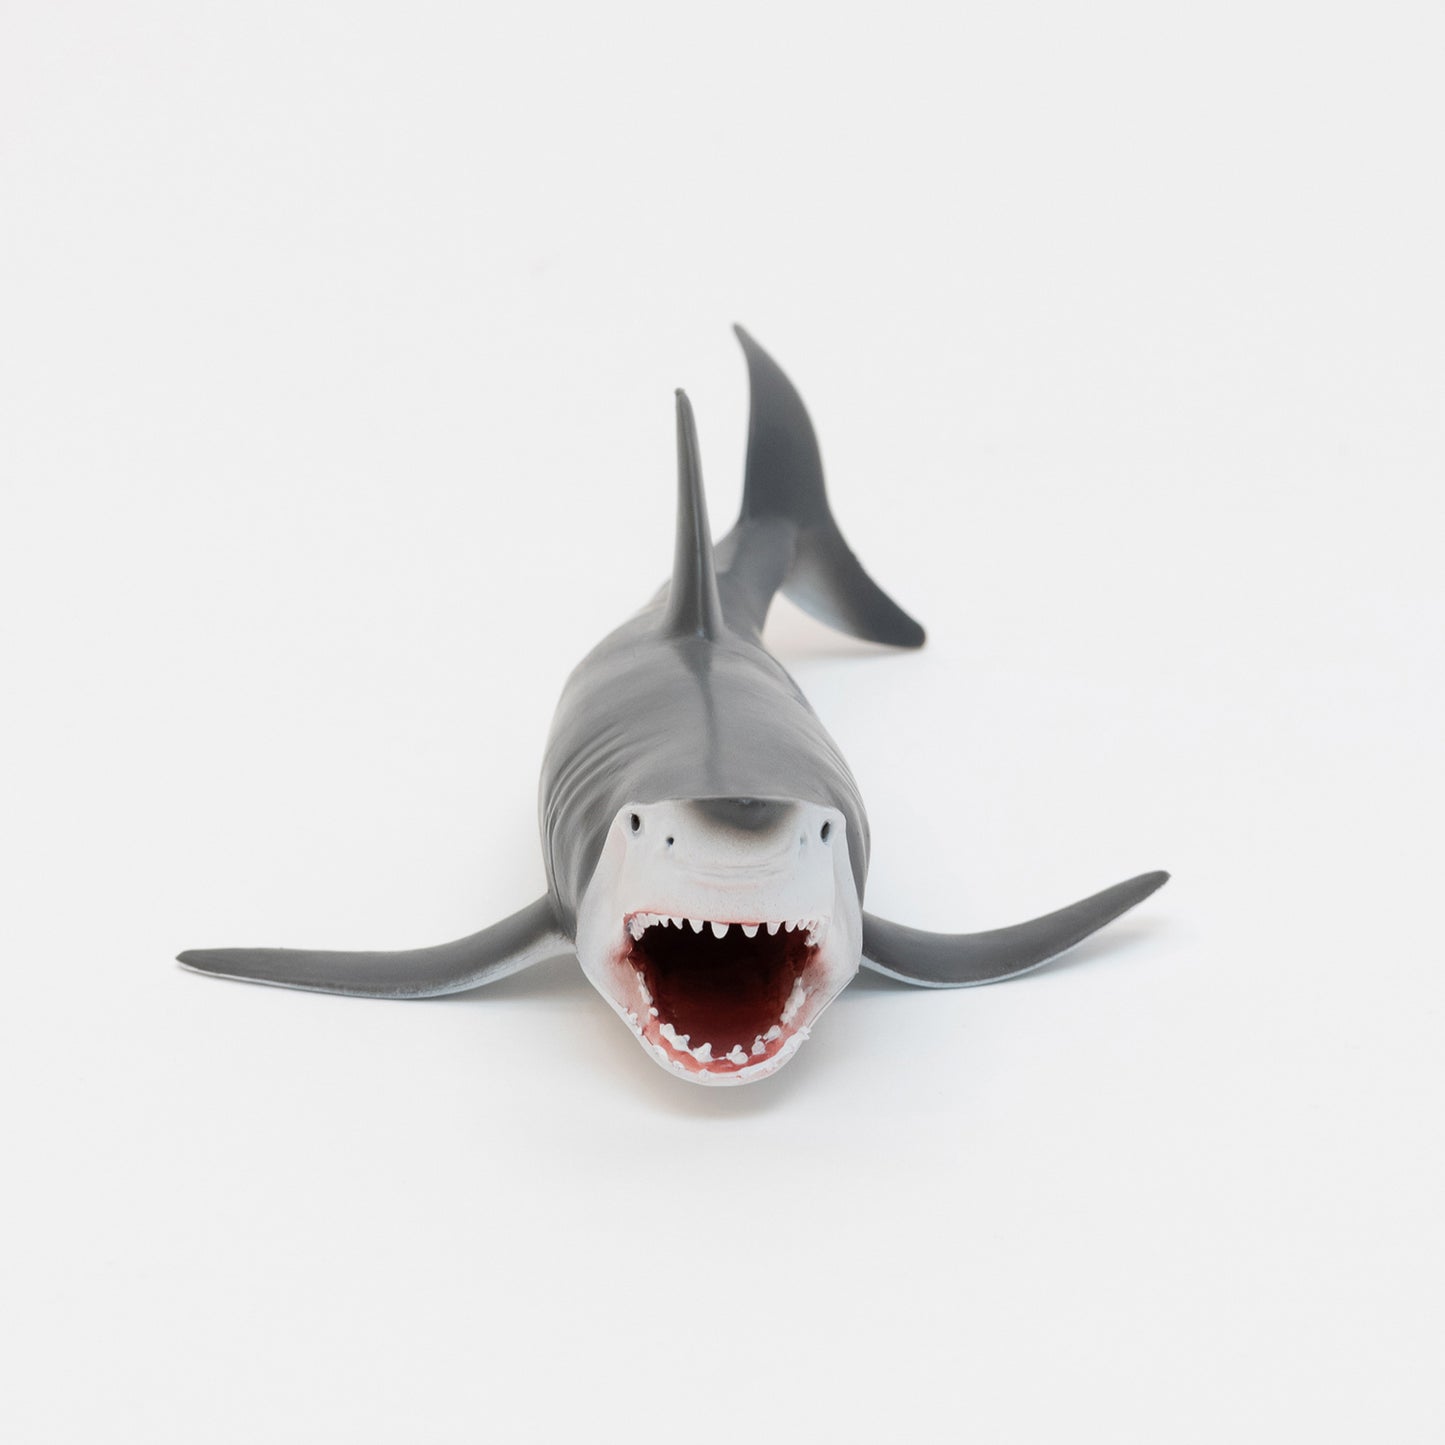 A plastic great white shark toy on a white background.